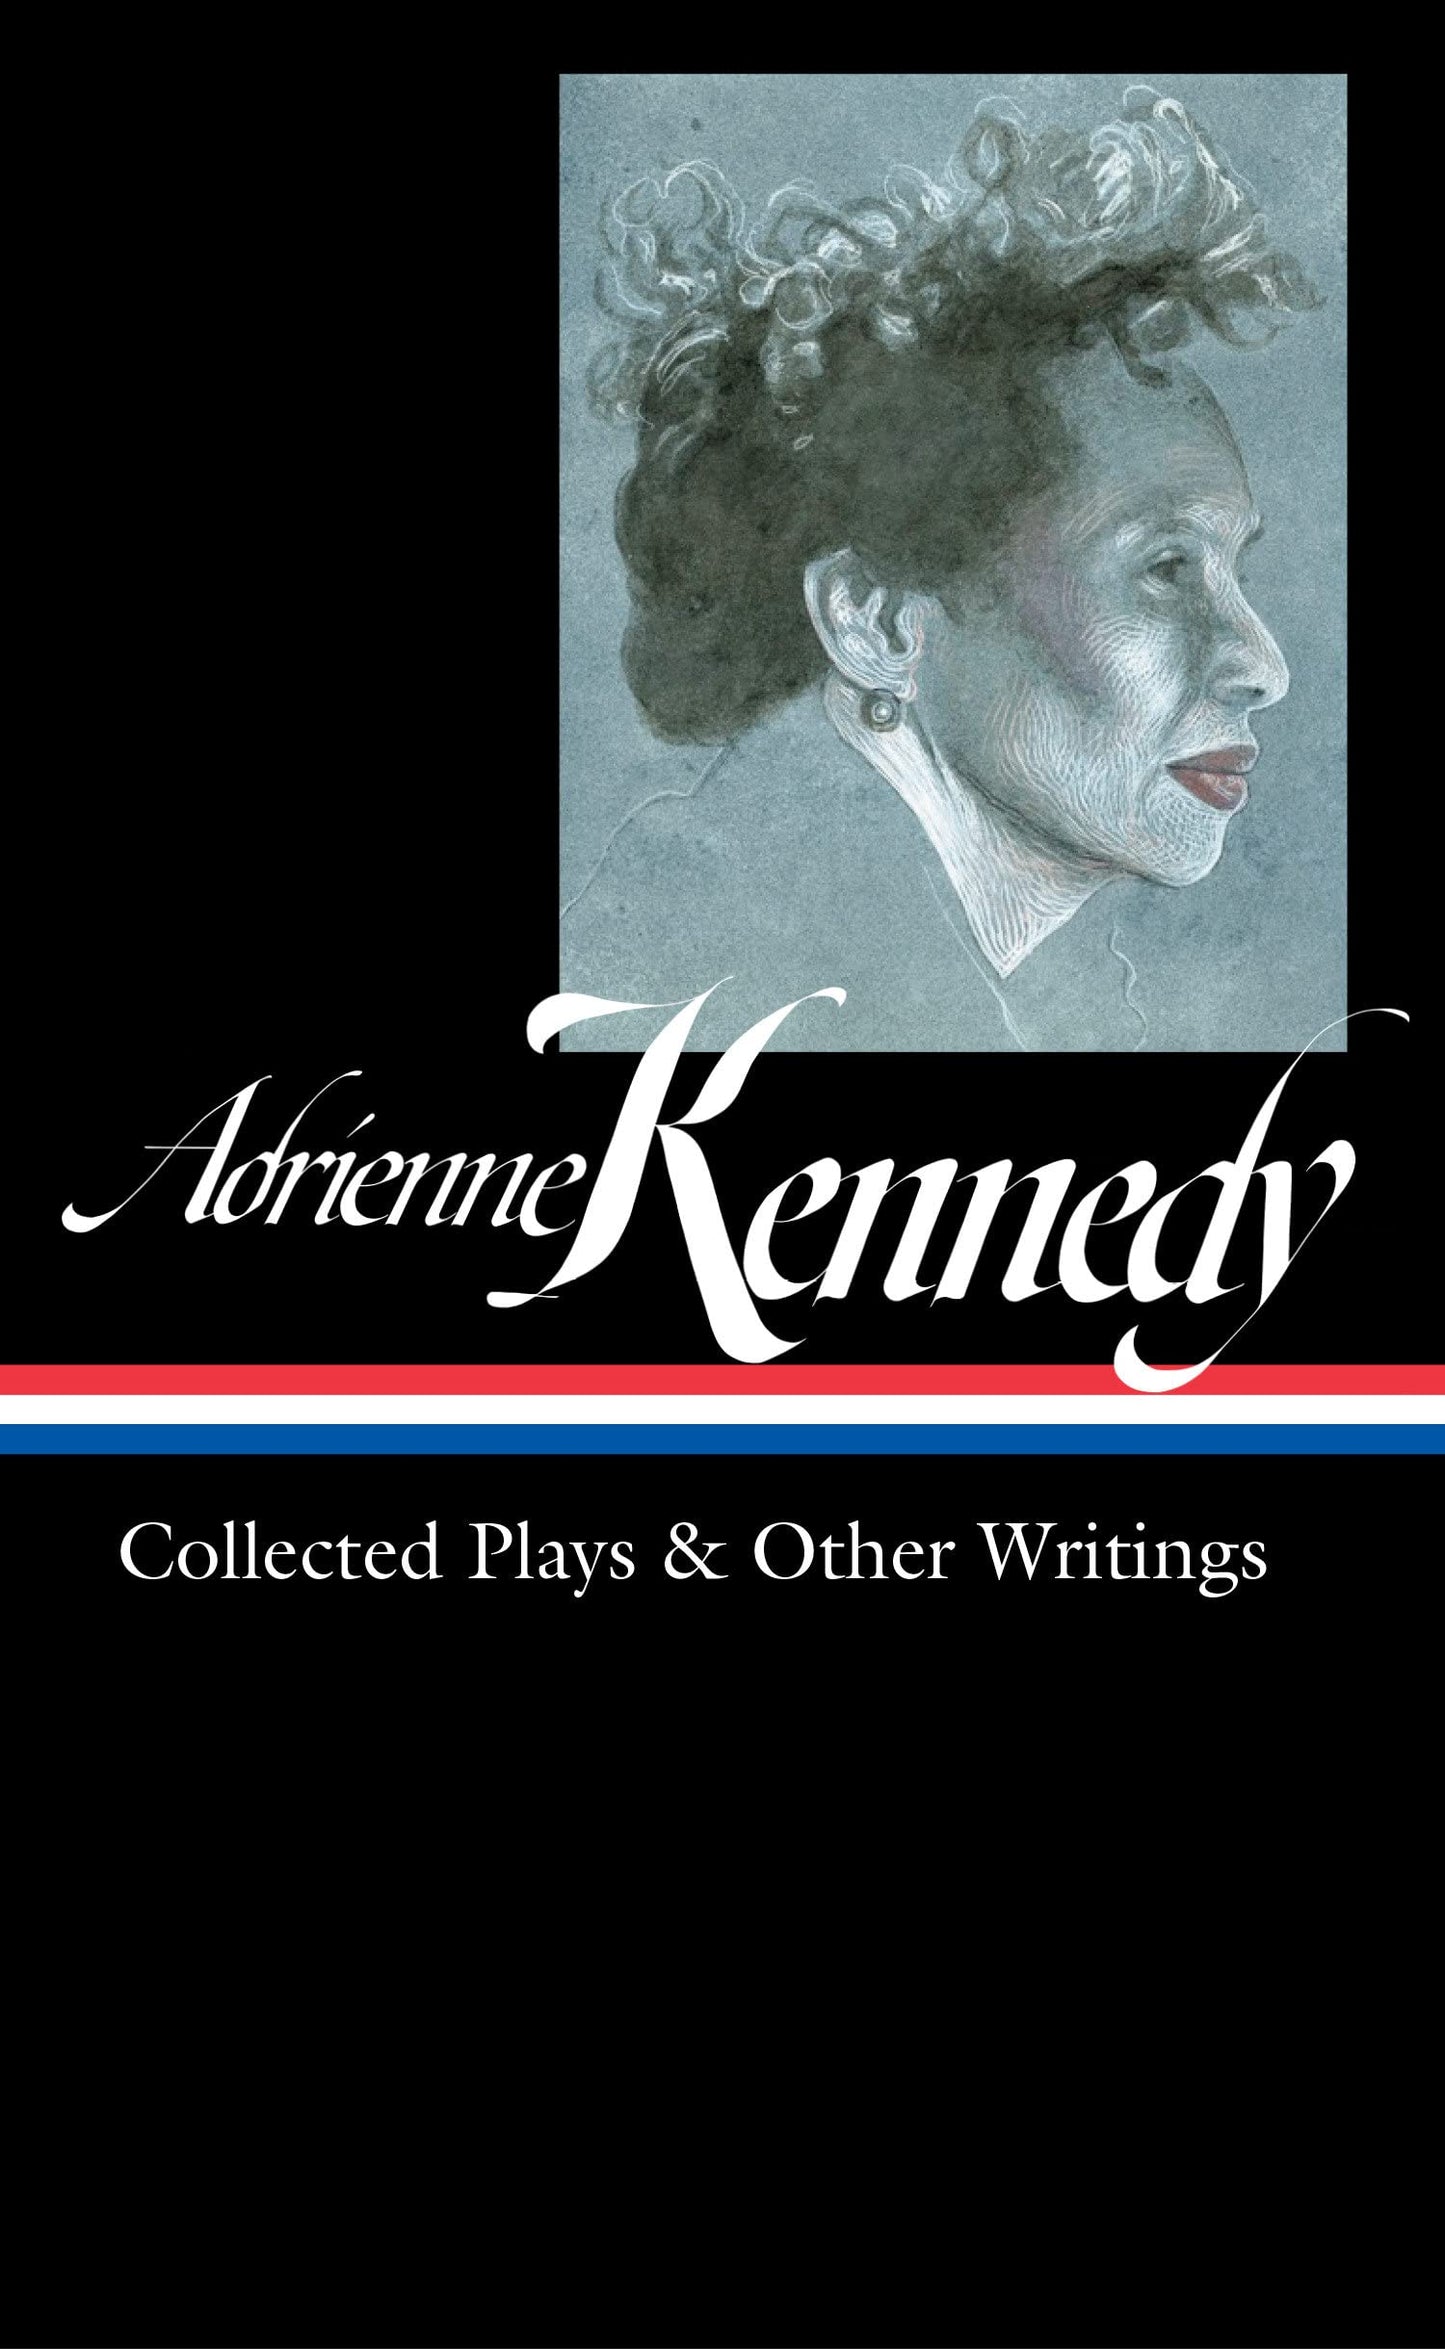 Adrienne Kennedy // Collected Plays & Other Writings